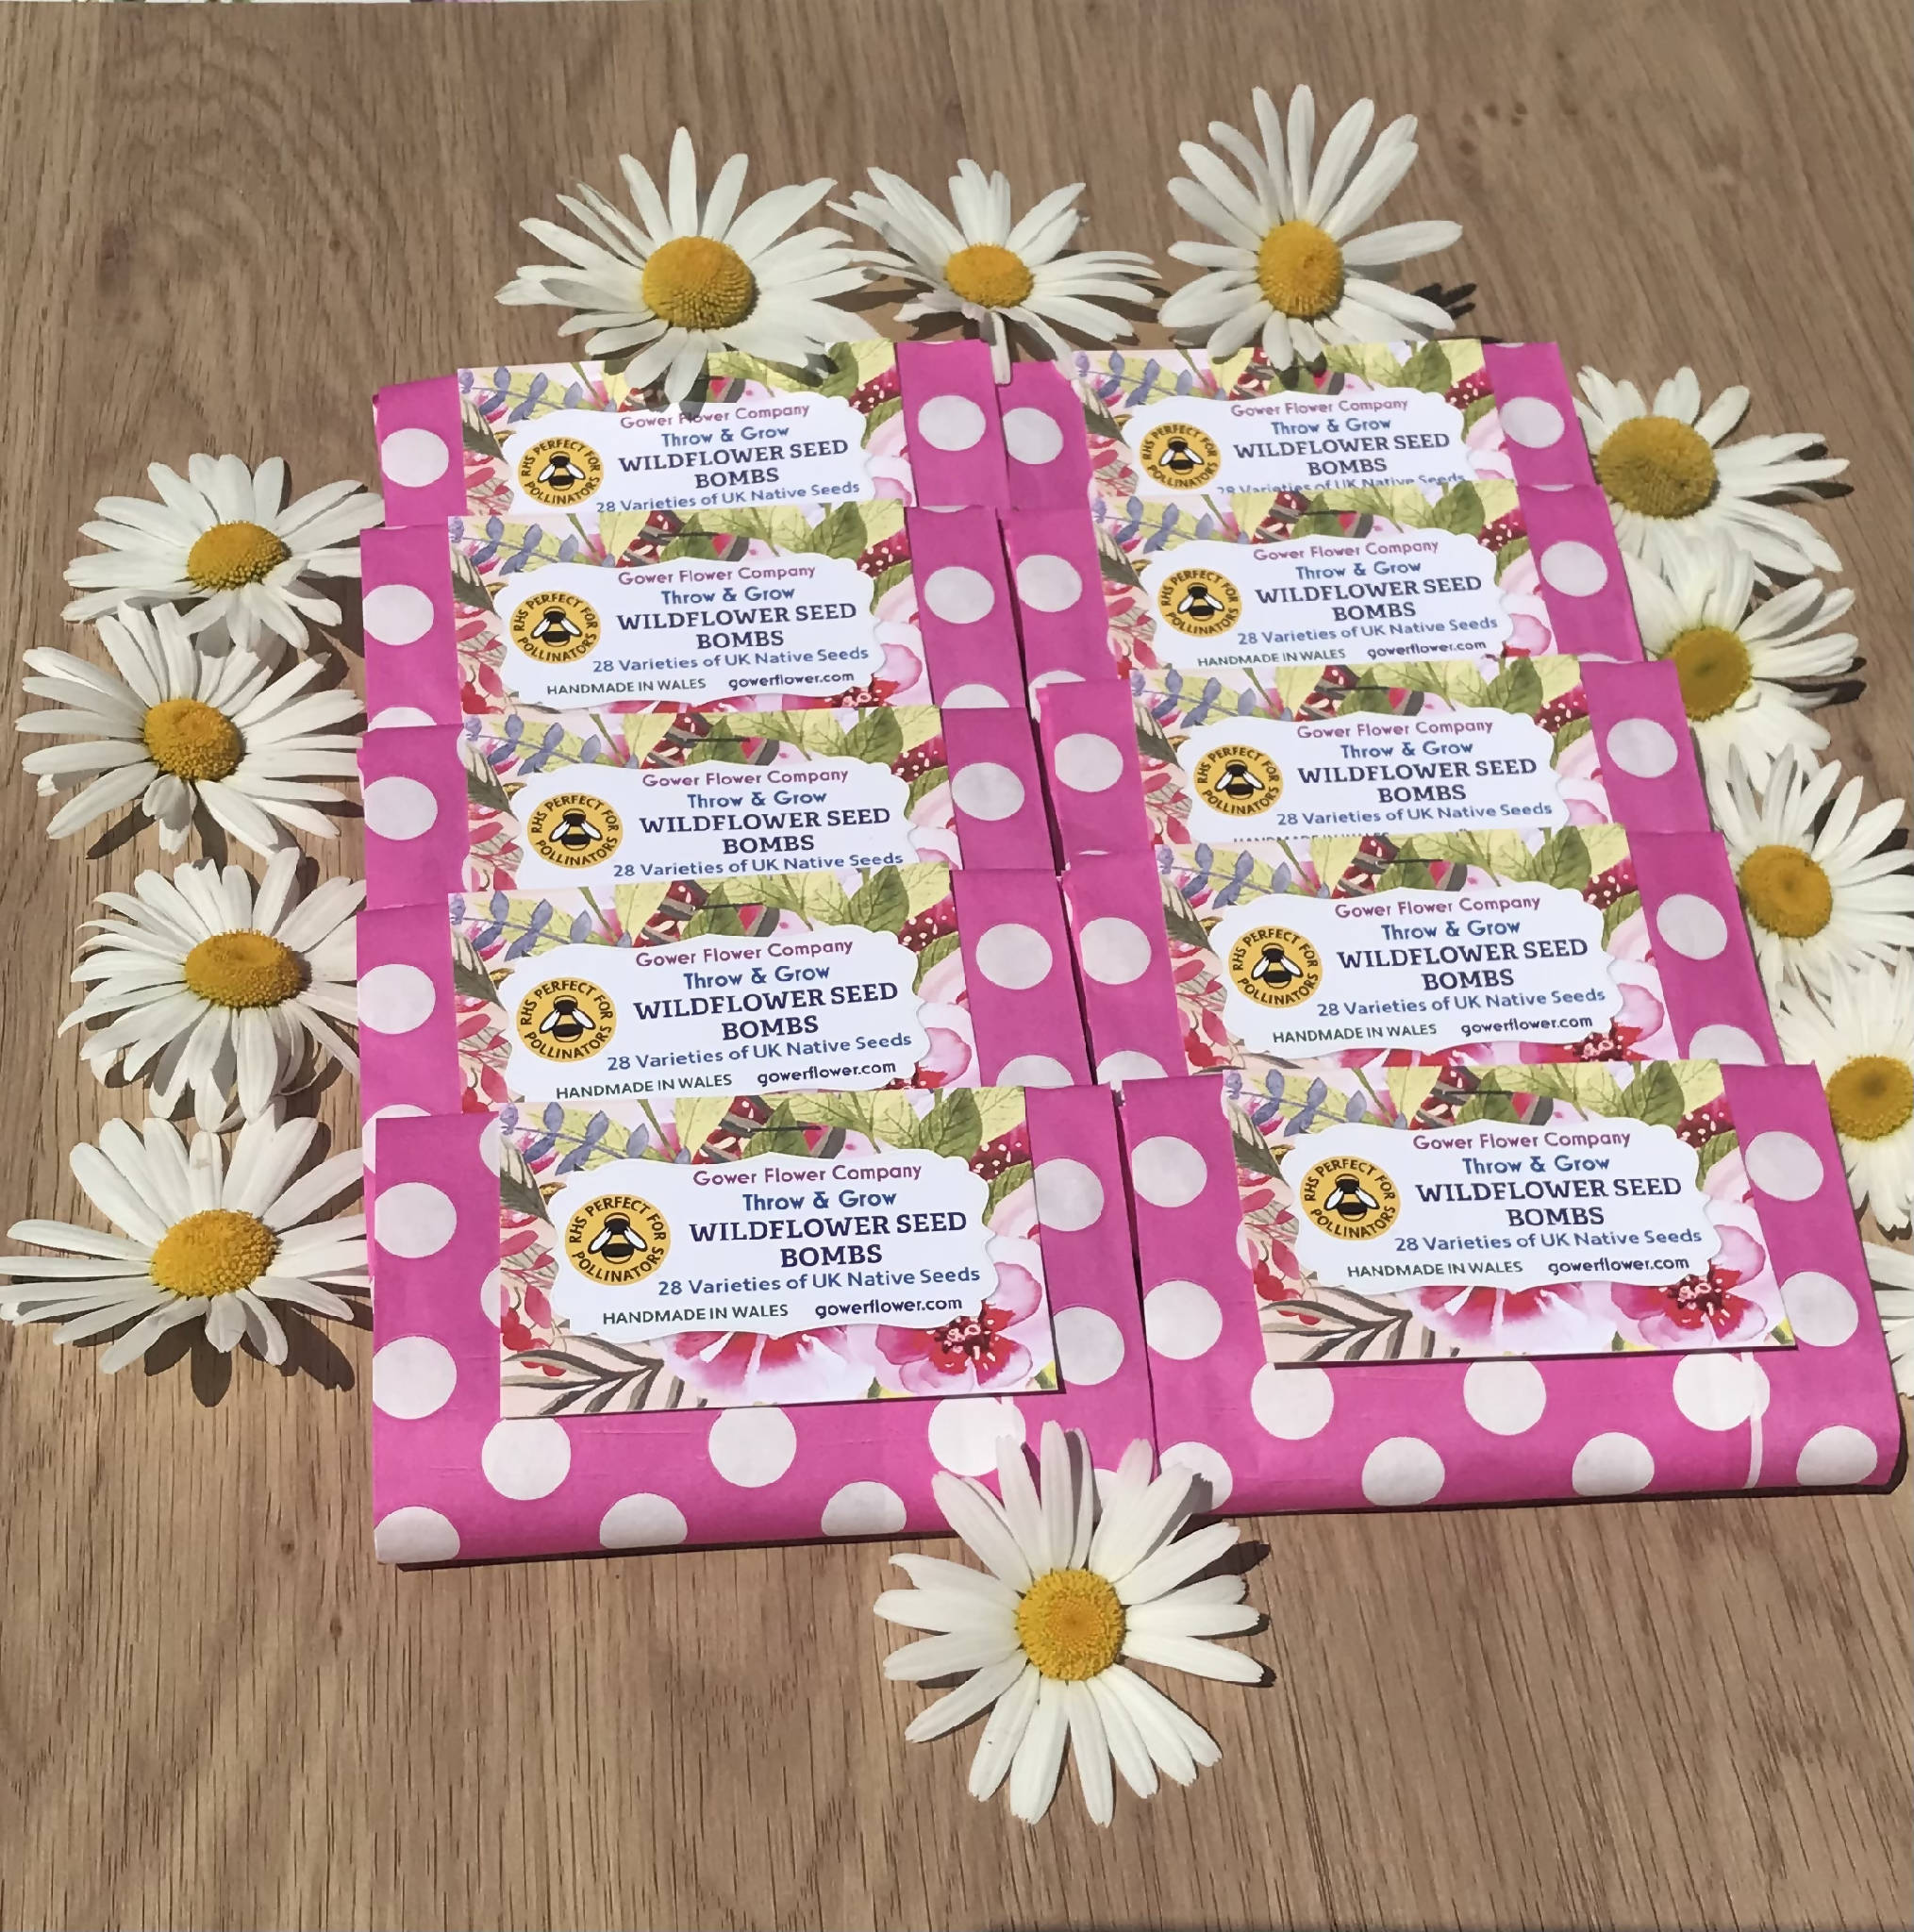 Wildflower Seed Bomb Party Pack - 10 packets each with 4 seed bombs and product card/instructions